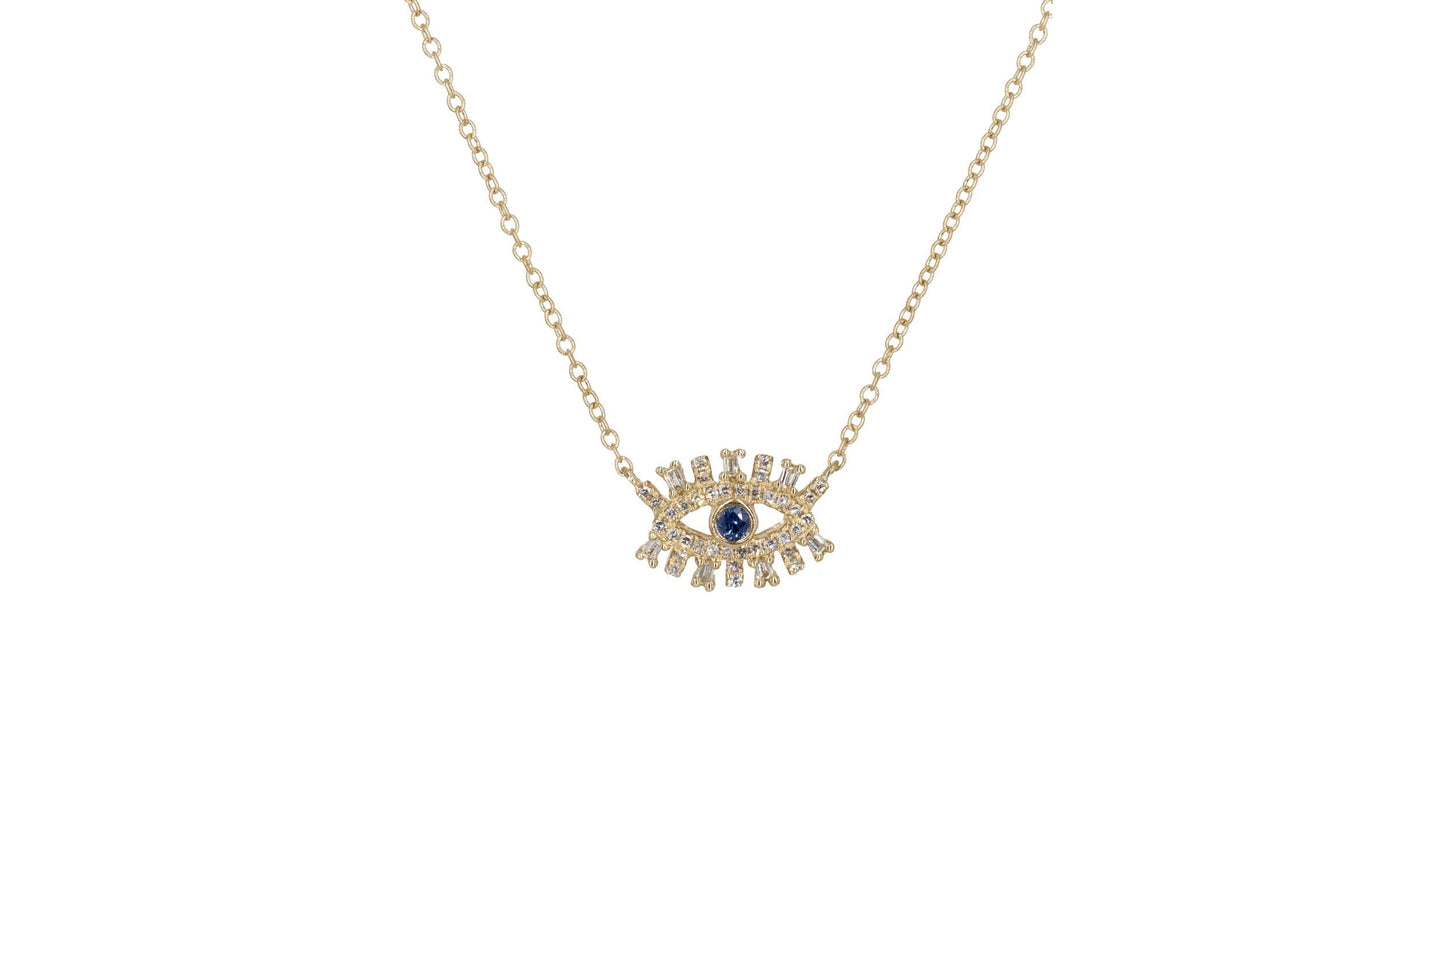 14KT Yellow Gold Diamond Pave Baguettes and Sapphire Evil Eye Necklace with Eyelashes